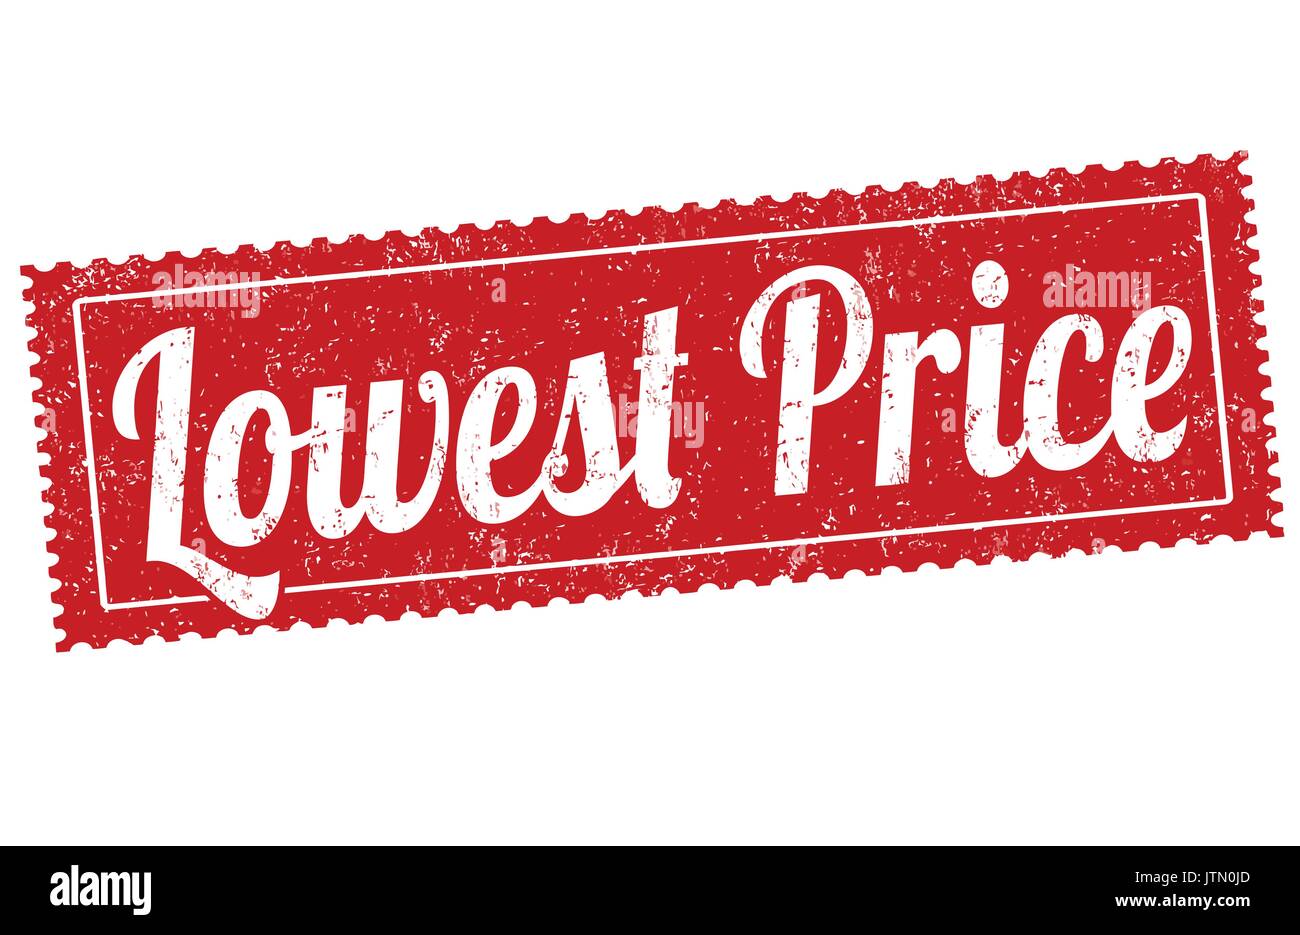 Lowest price grunge rubber stamp on white background, vector illustration Stock Vector